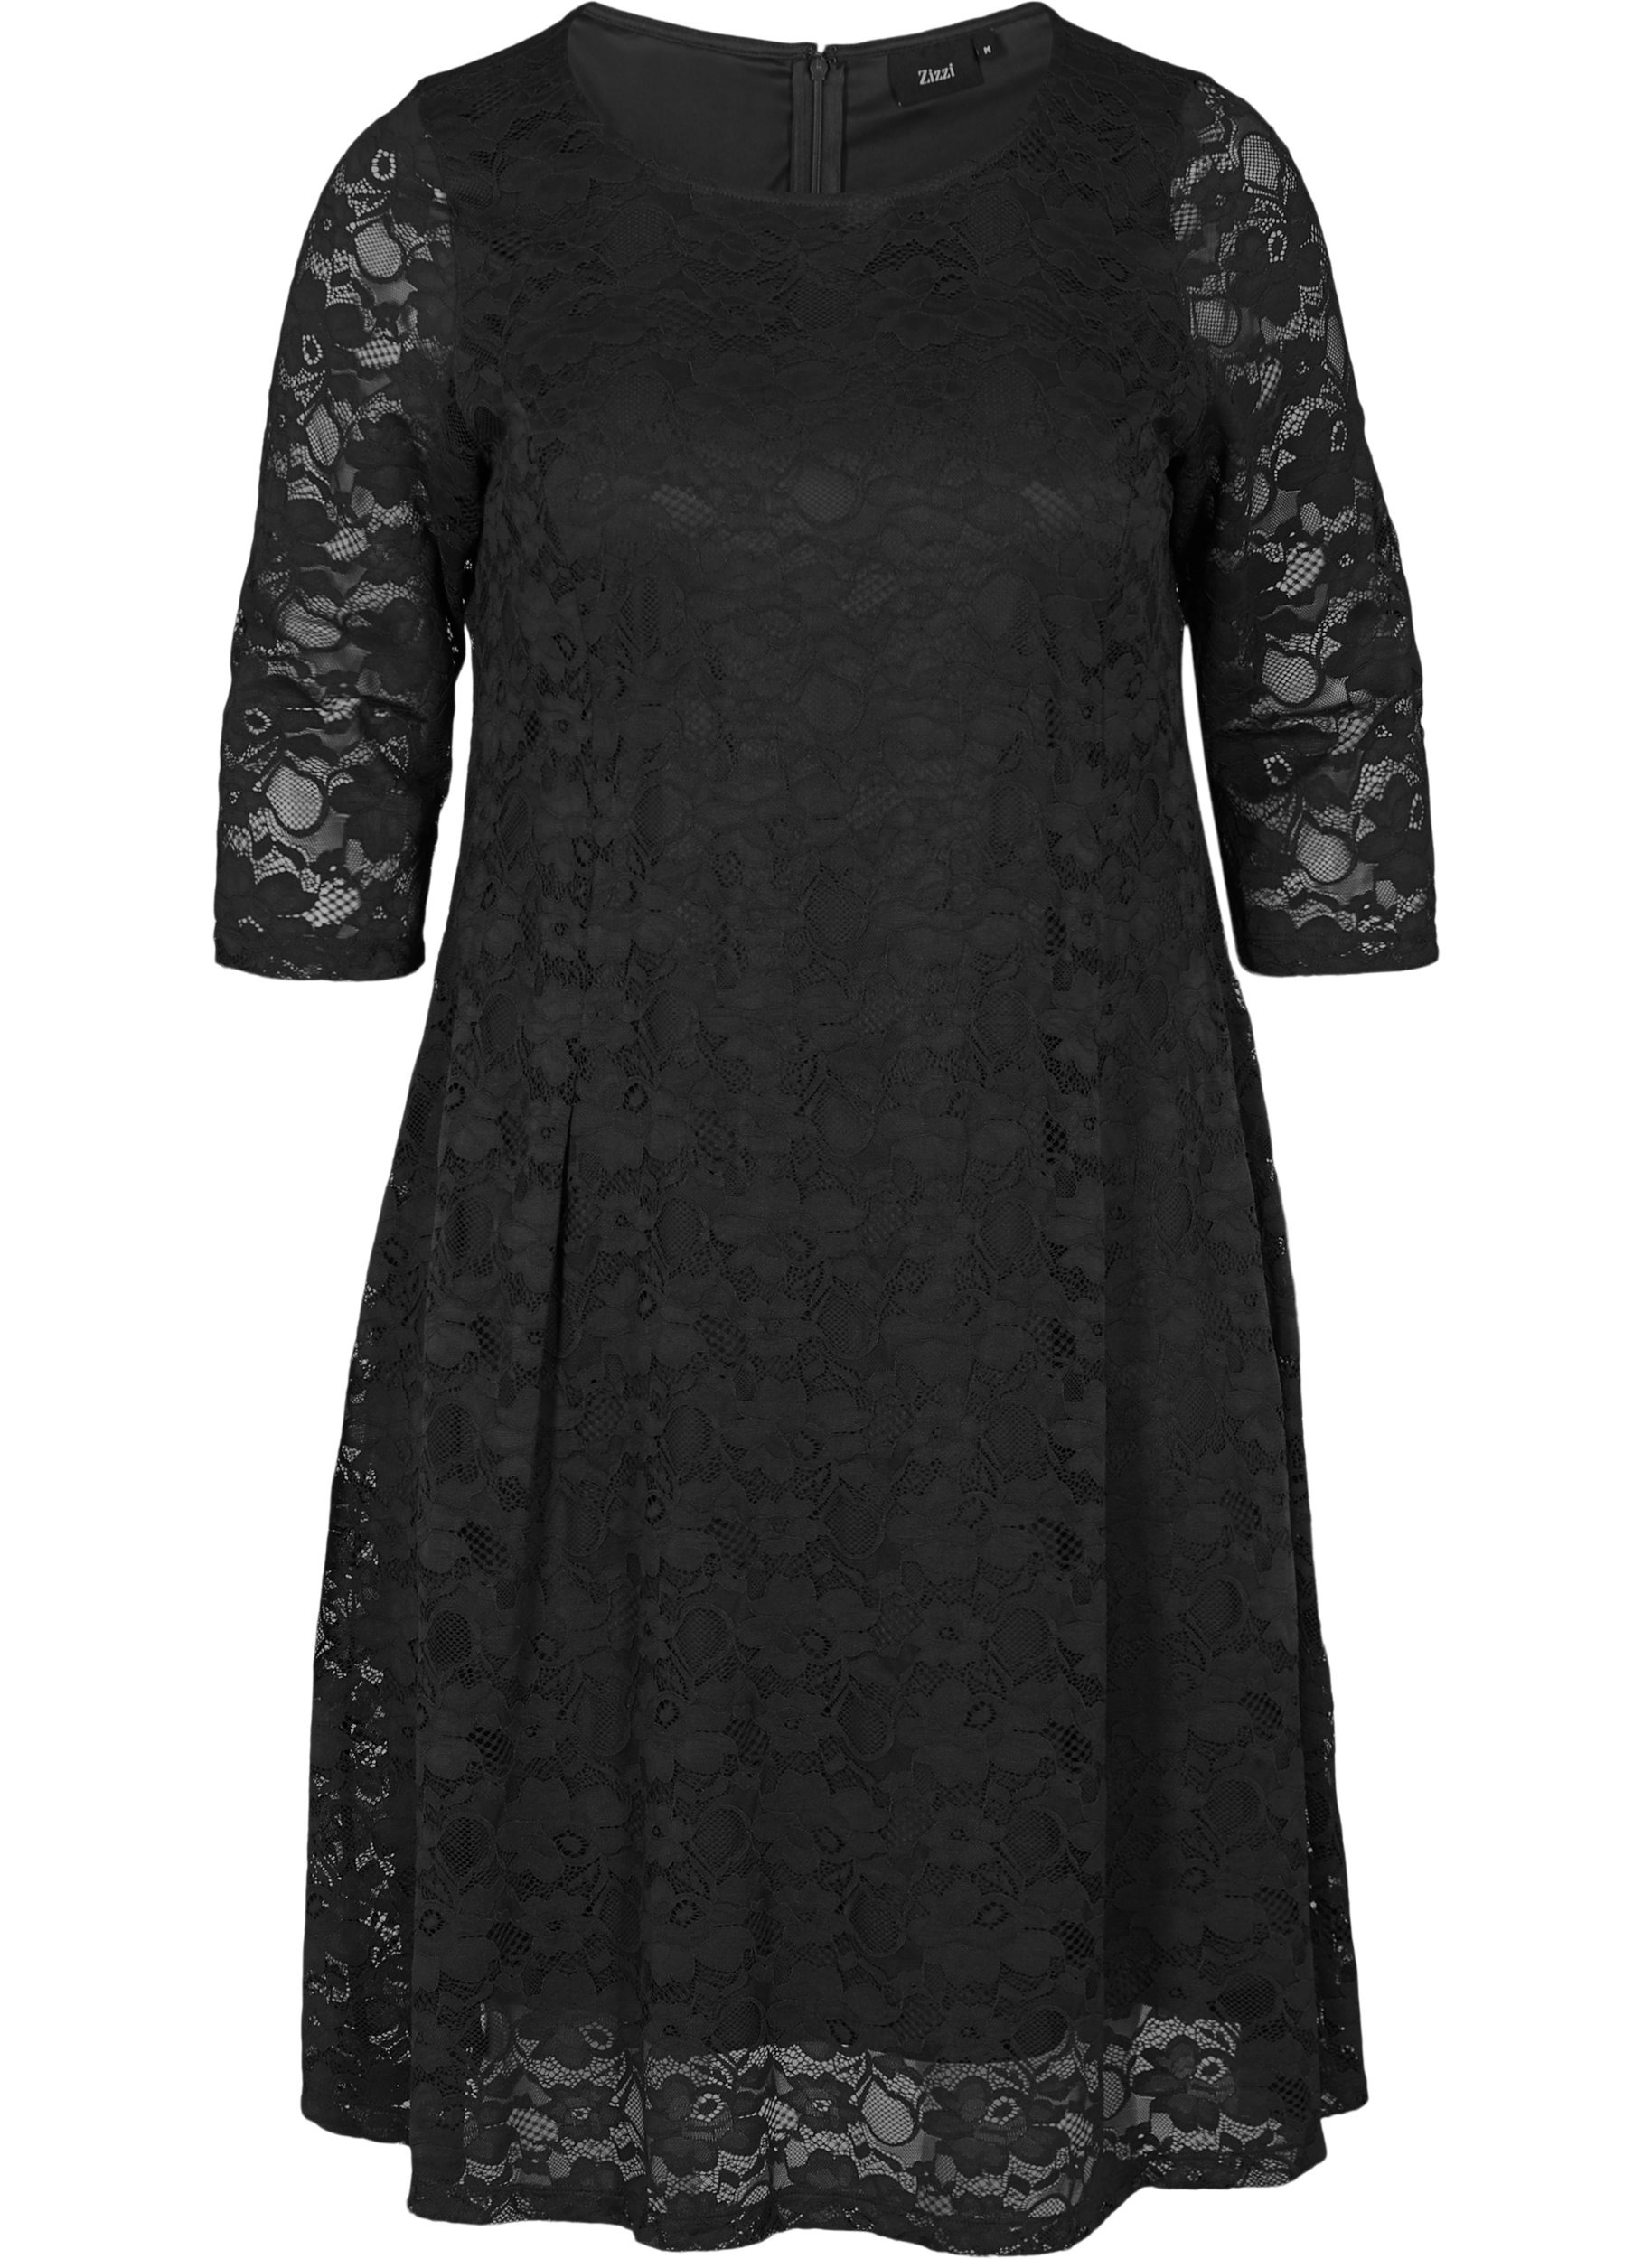 Lace dress with 3/4 sleeves, Black